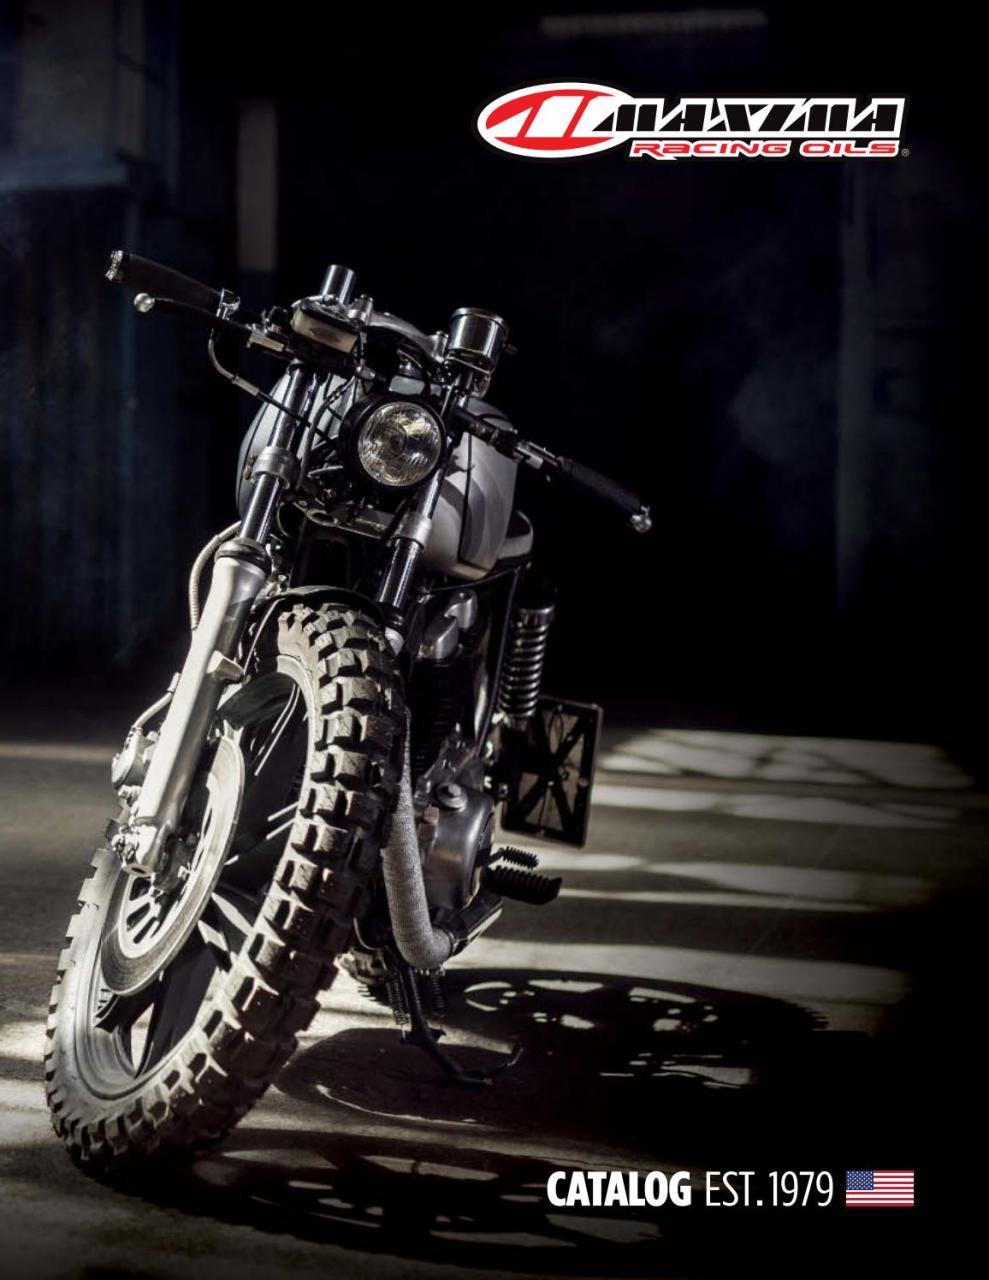 MAXIMA Racing Oils | Motorcycle by Forbes & Davies Ltd - issuu